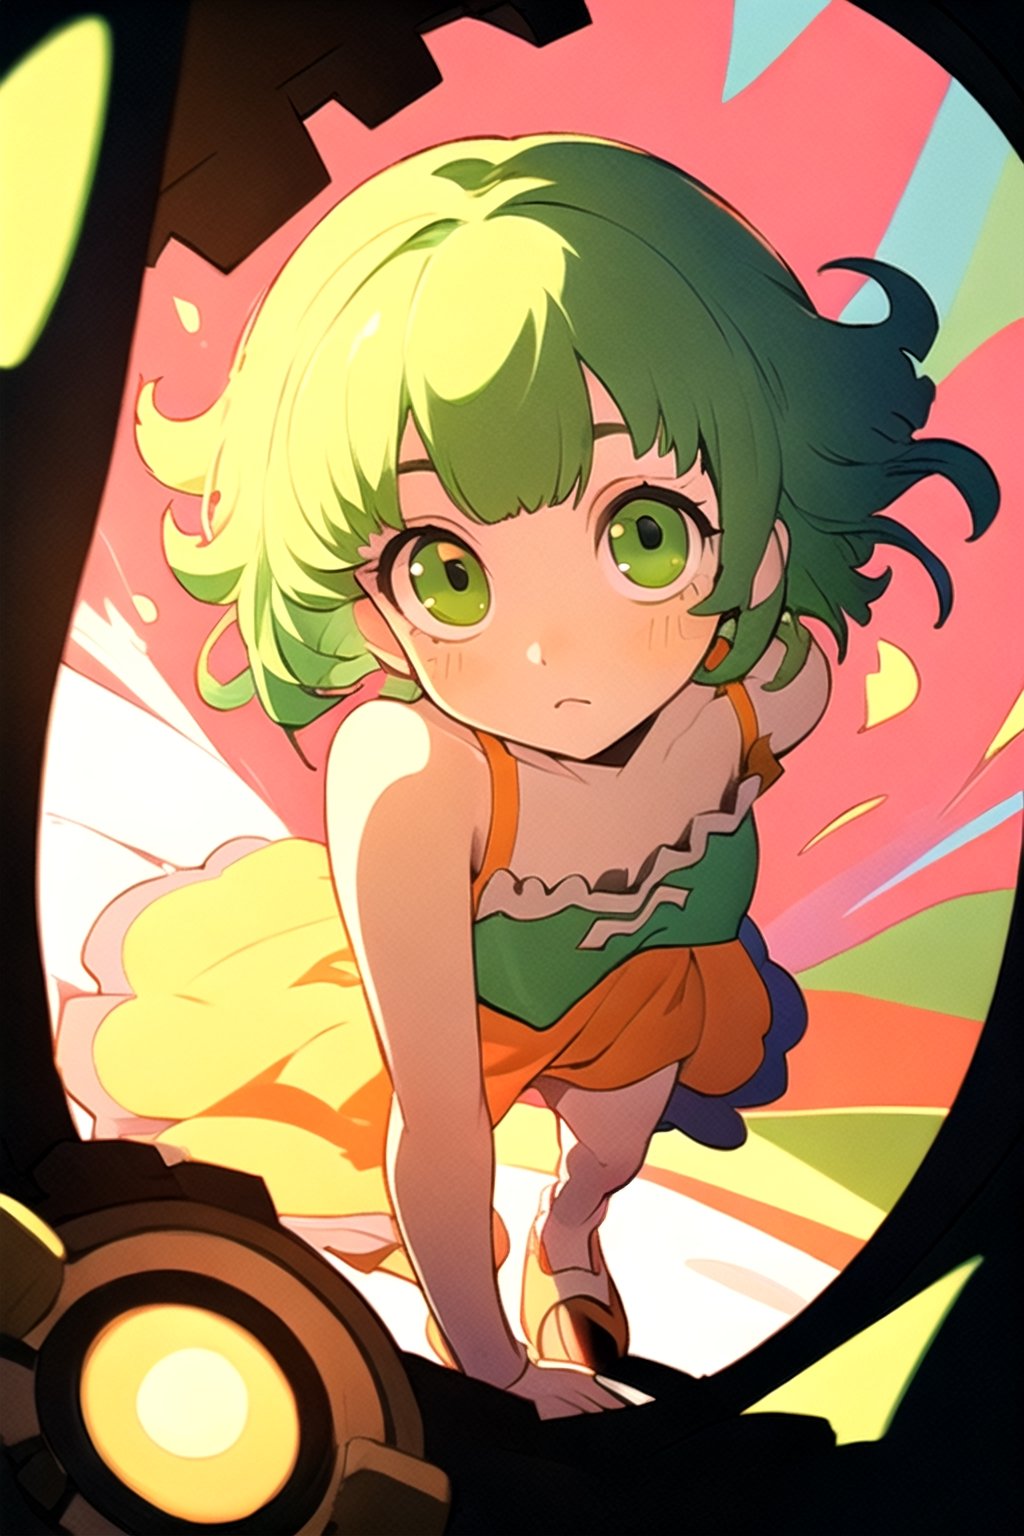 (best quality, masterpiece), soft lighting, dynamic upper angle, 1girl, Megpoid Gumi, beautiful short hair with two large bangs, beautiful detailed eyes, simple design, rounded boobs, upper view, green hair, green eyes, original detailed dress, cool pose, deep shadows in the eyes, cute face proportions,GUMI